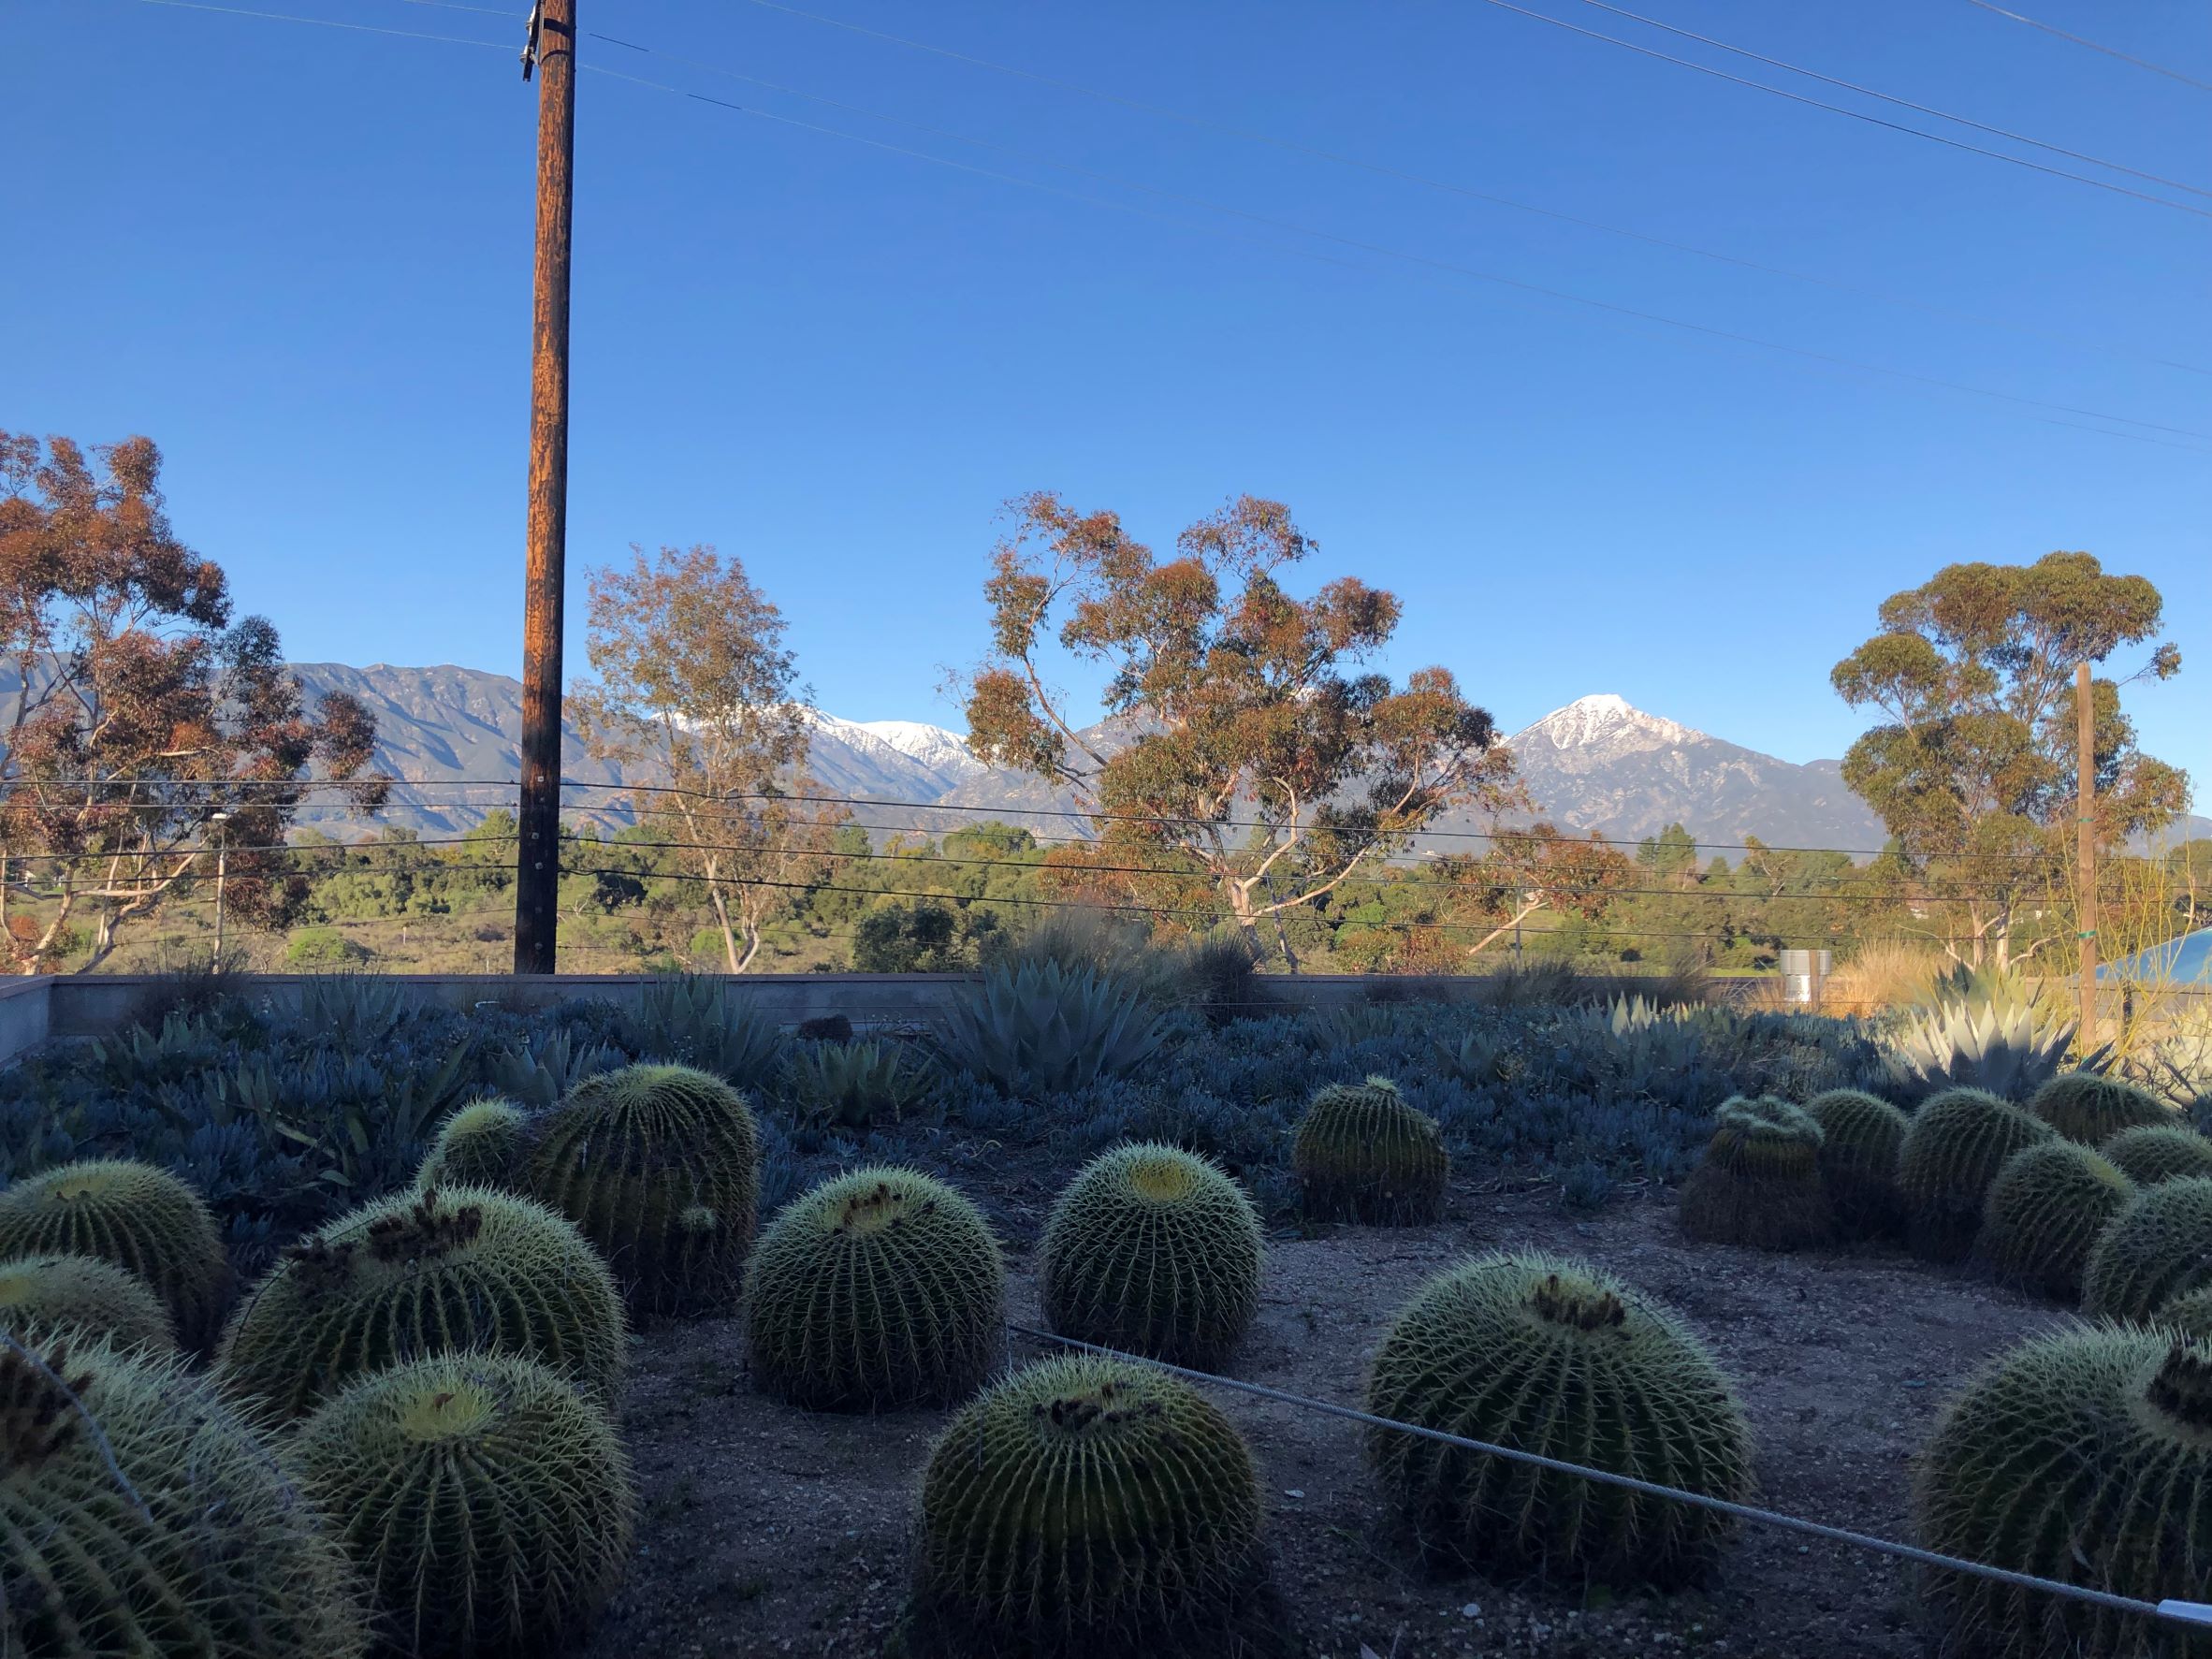 Cacti with mountain in the background